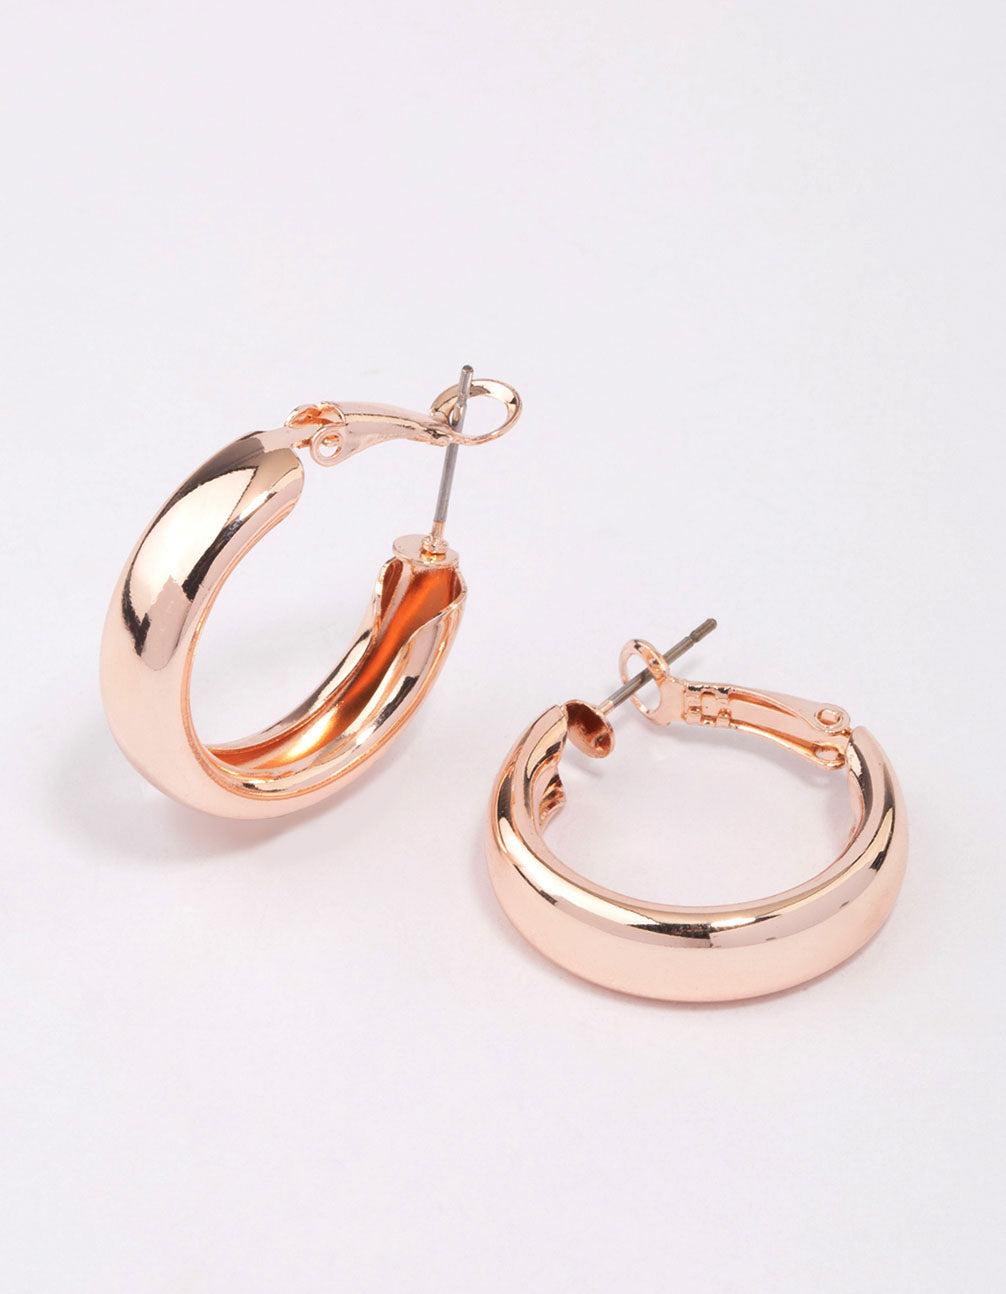 925 Sterling Silver Round Hoop Earrings For Women Fashionable Party Garnet  Jewelry Accessories And Christmas Gifts In 3/4/5/6CM Sizes From Wanyar,  $7.11 | DHgate.Com